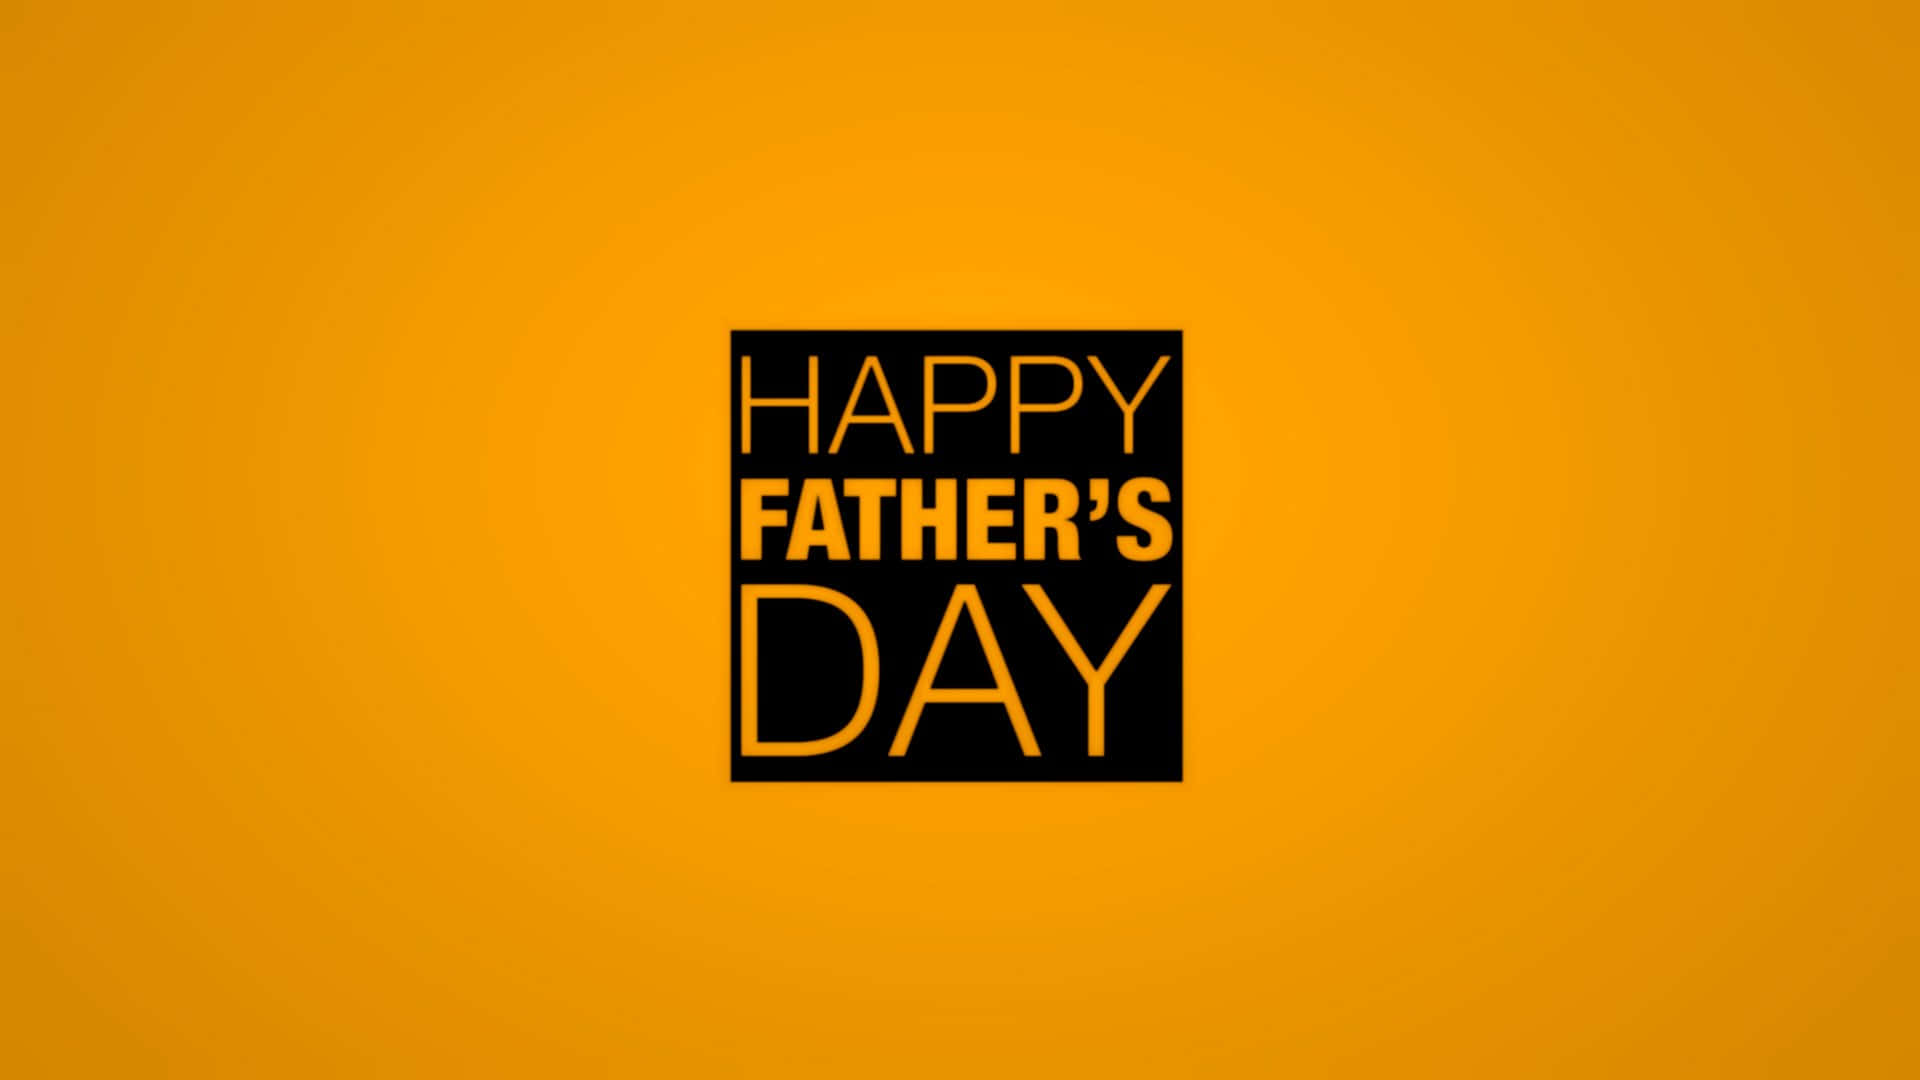 Image  "Celebrate Father's Day and Show Gratitude For Everything Your Dad Does"